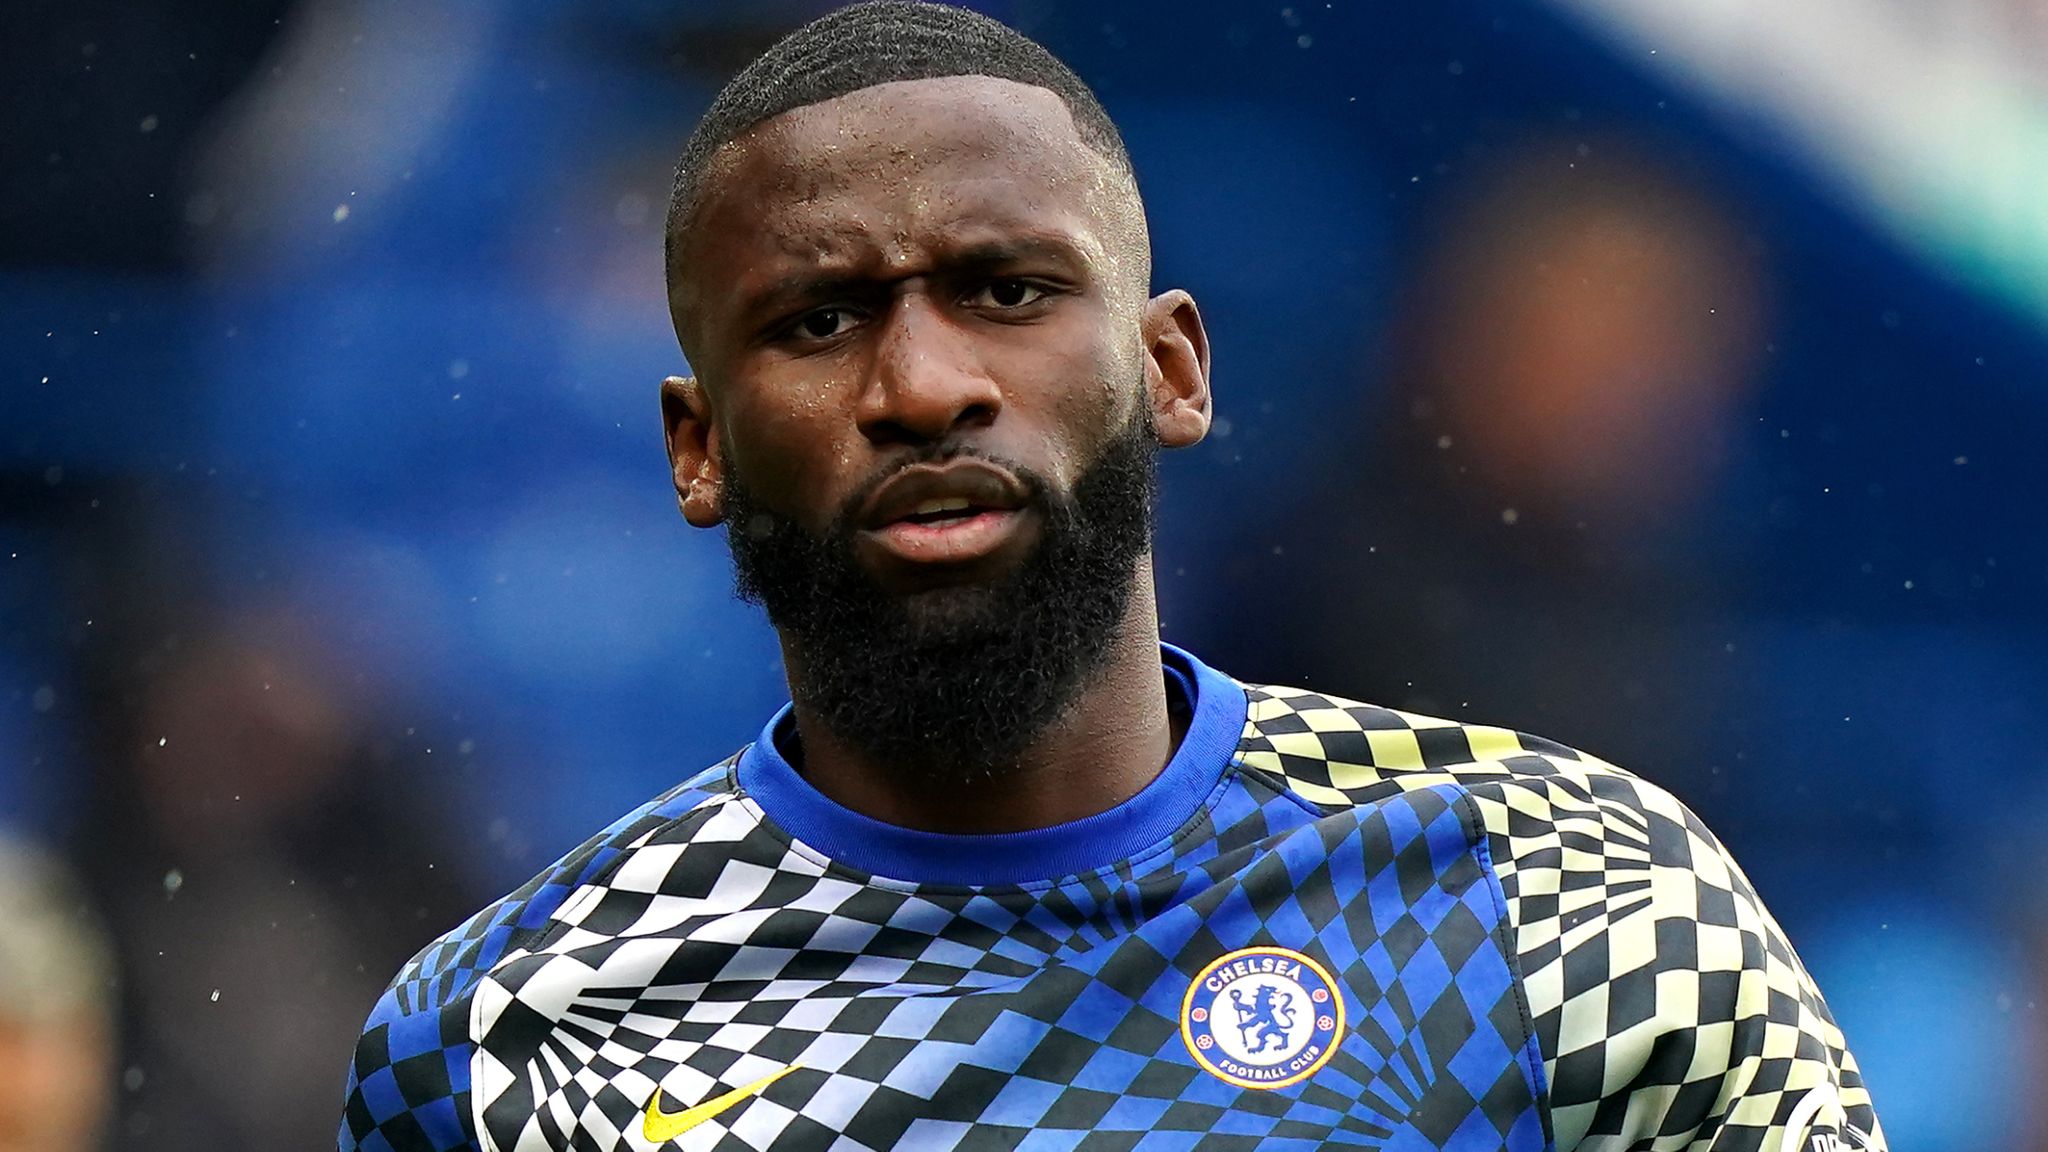 Sierra Leone’s Global Ambassador For Sports, Antonio Rudiger Pens Passionate Message of Appreciation to Sierra Leoneans